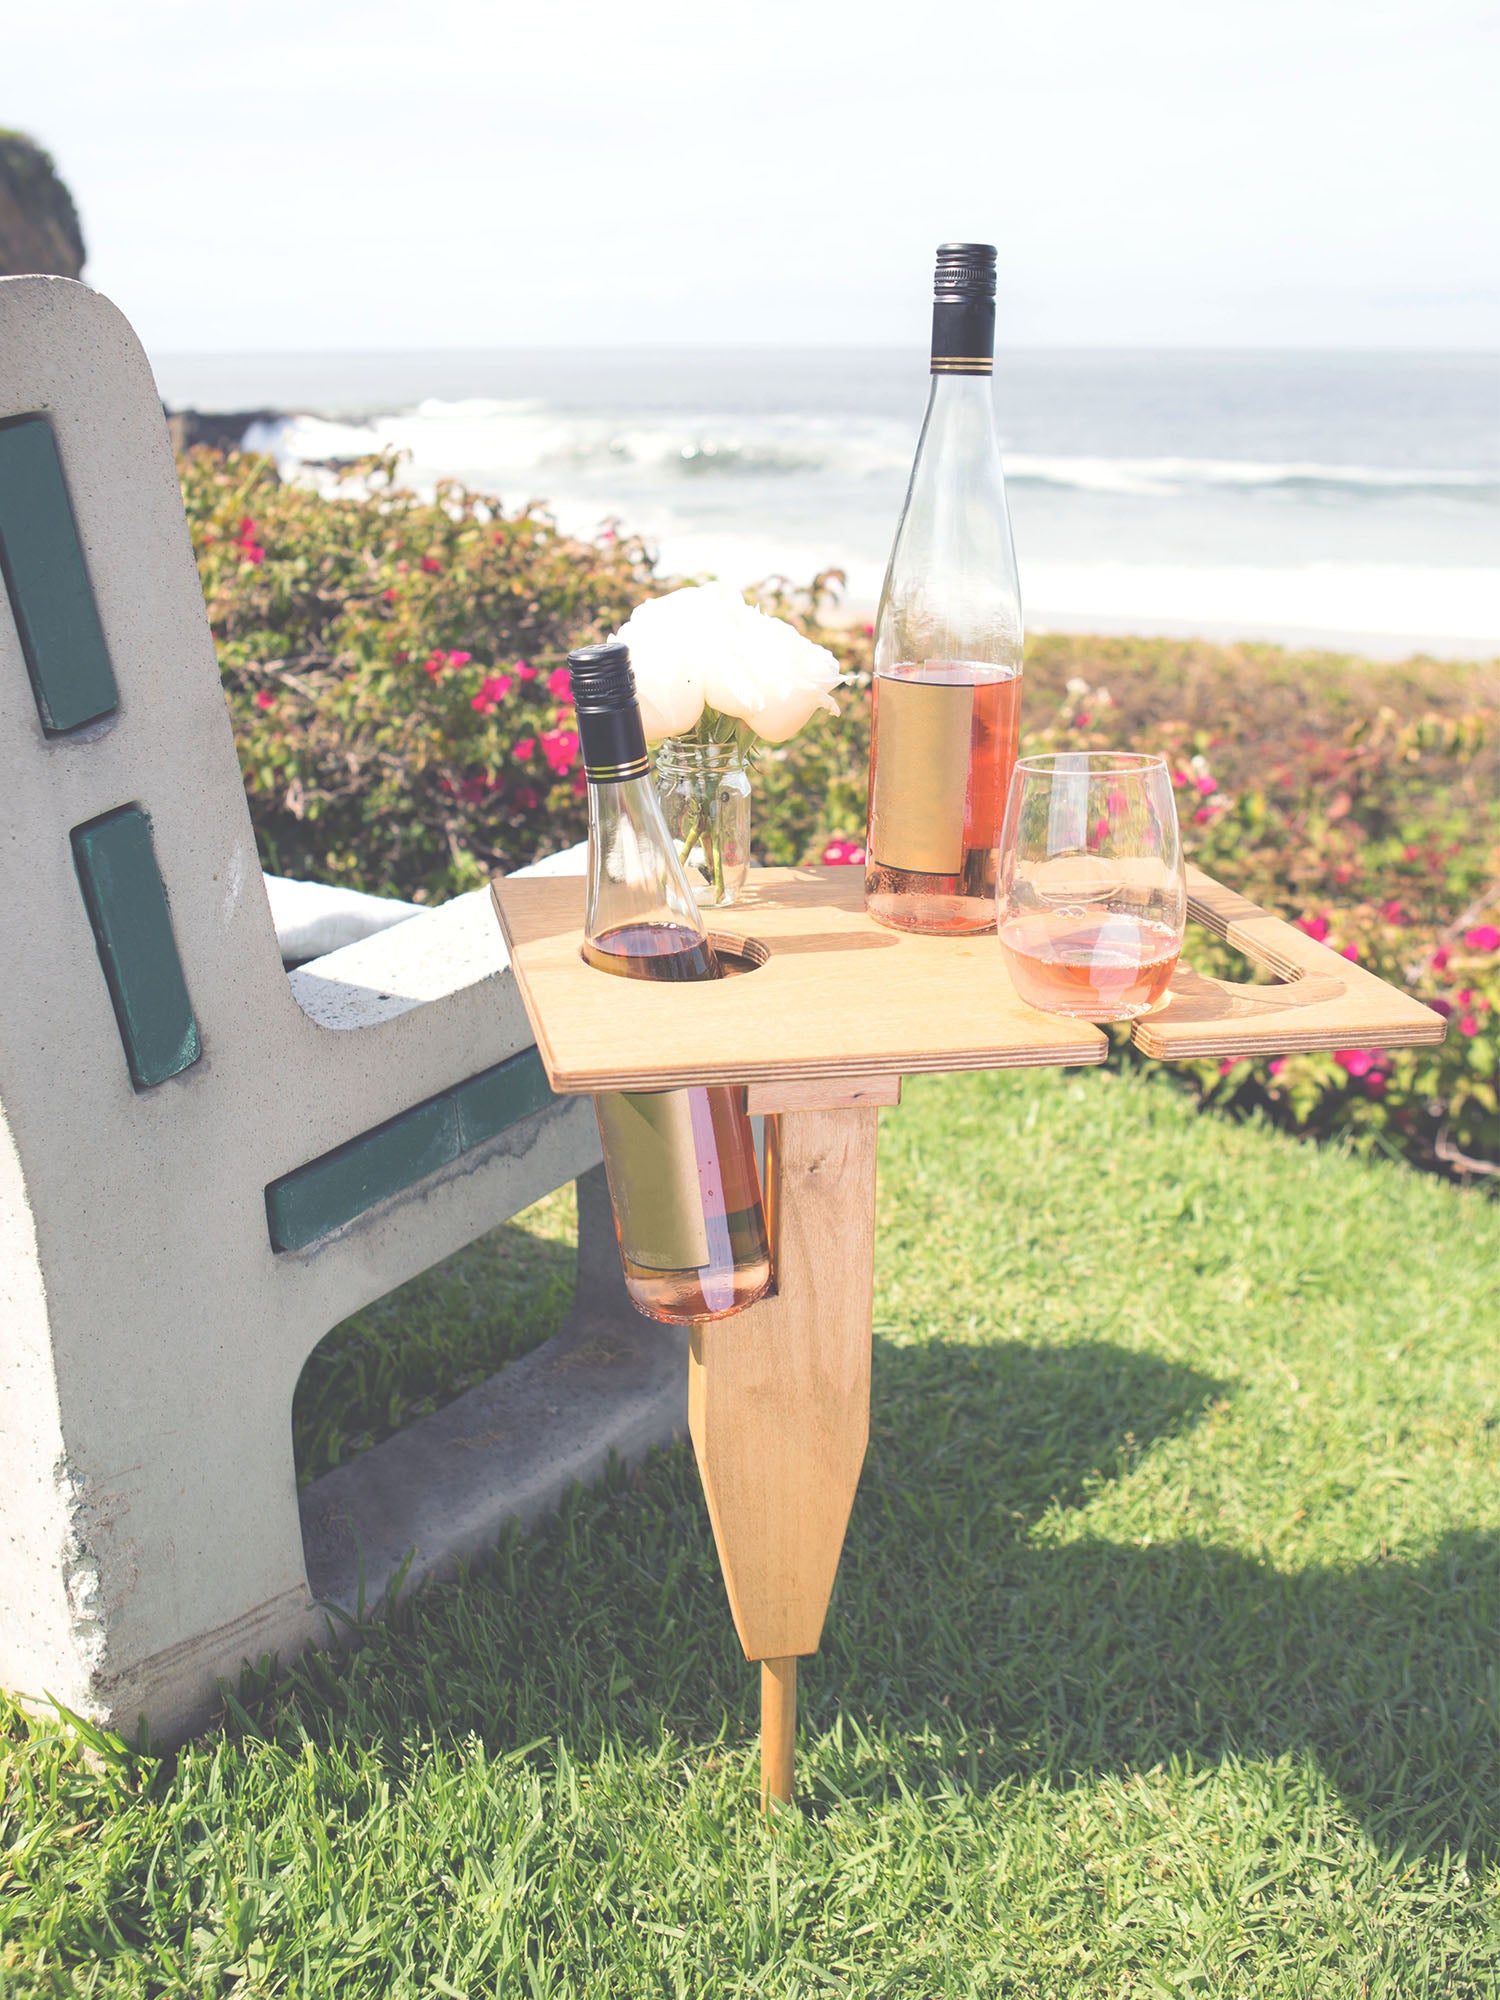 Murray portable beach table in naturally sunkissed color unfolded standing up in grass at park with refreshment drinks